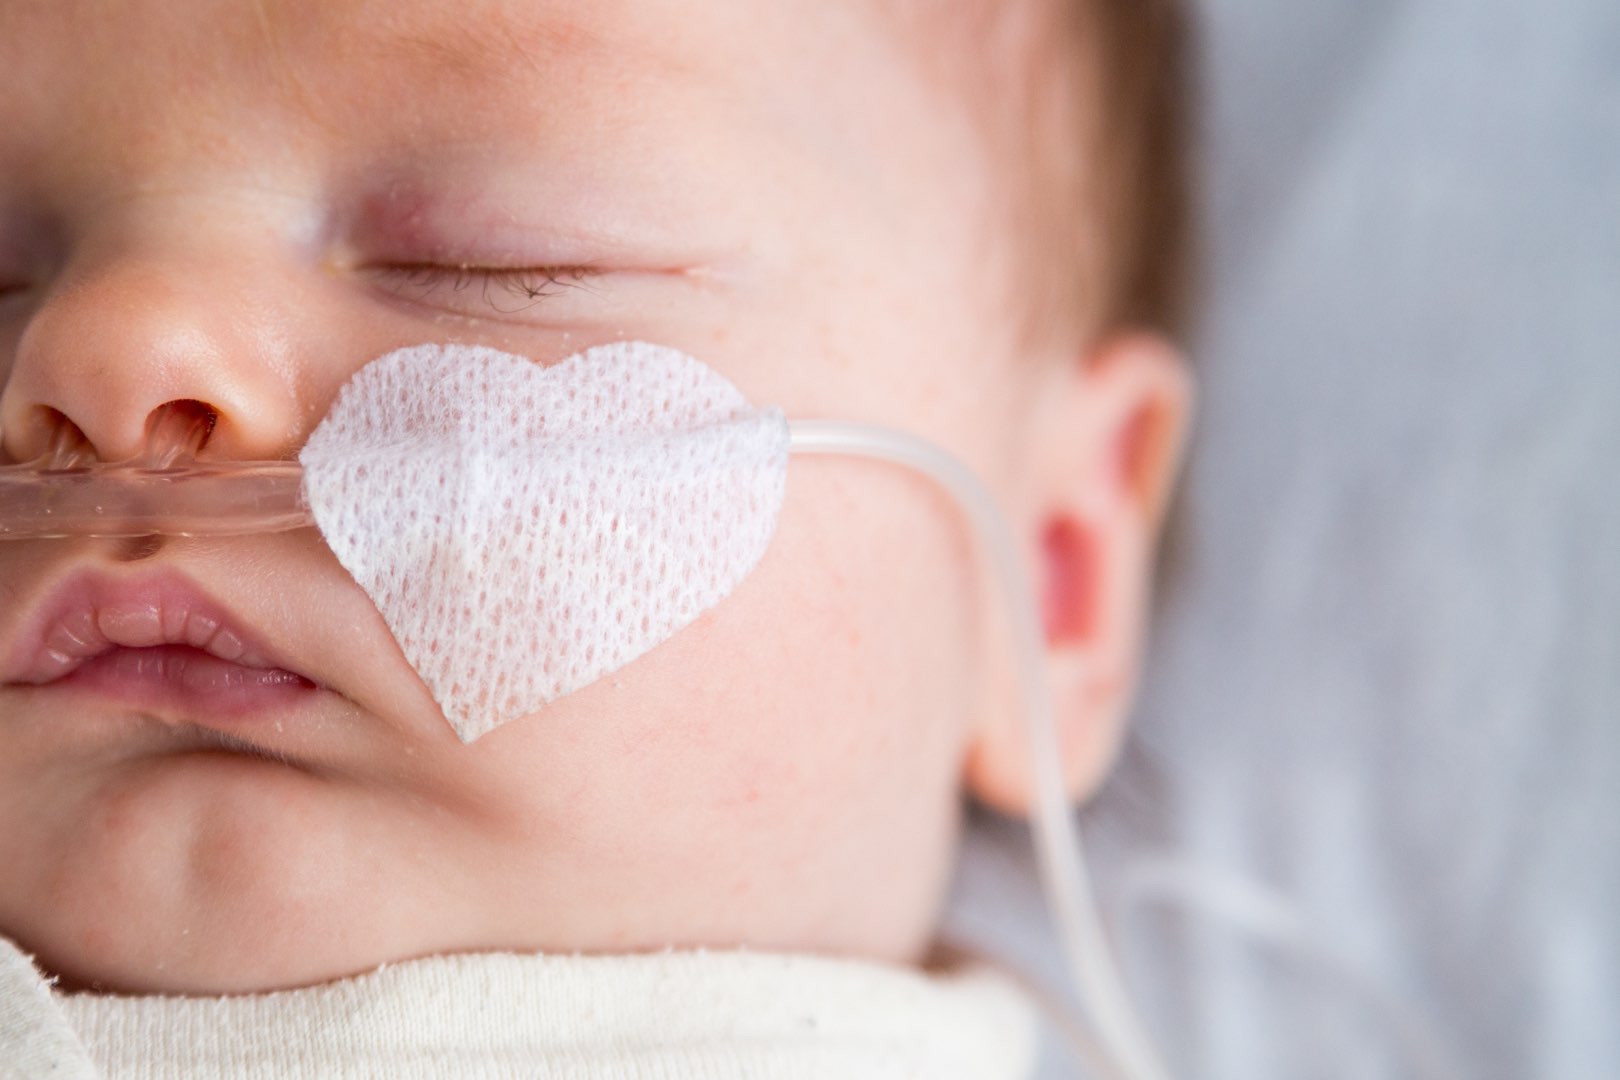 A baby with a oxygen tube taped with a heart-shaped bandage. To keep the baby healthy, preventing healthcare associated infections is paramount.